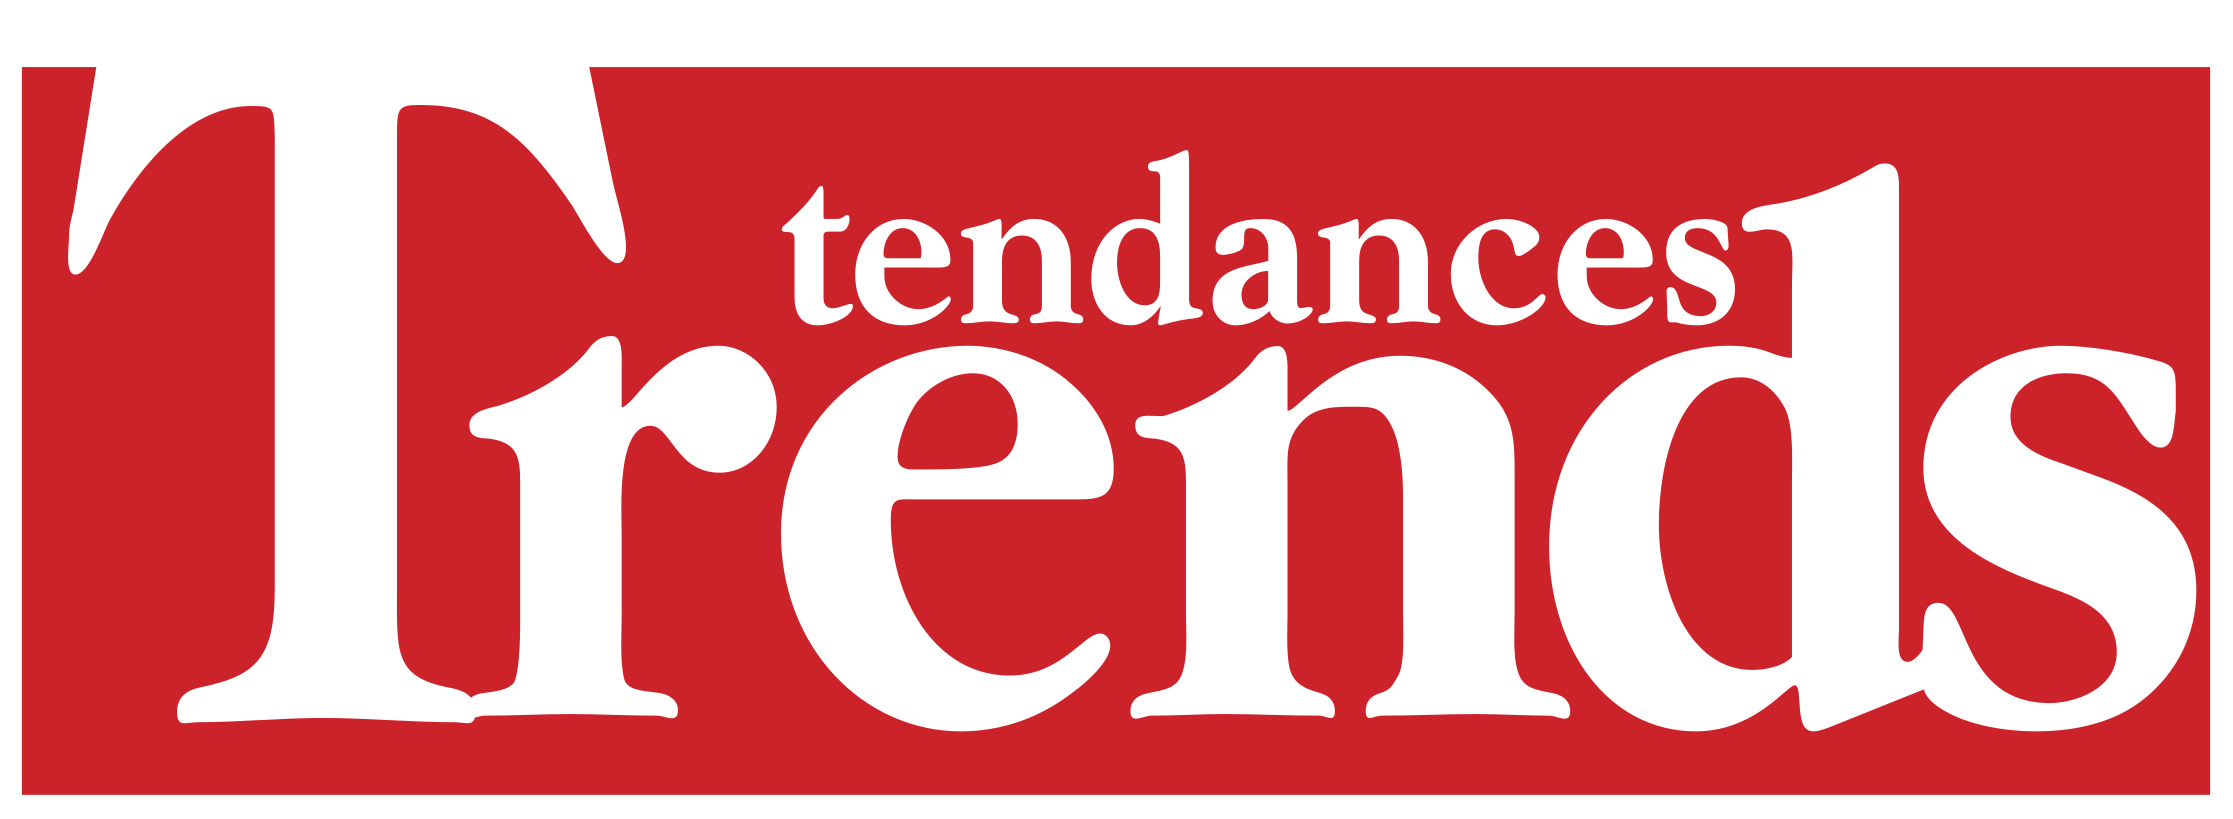 Logo of Trends Tendances, a magazine that published articles about We Invest